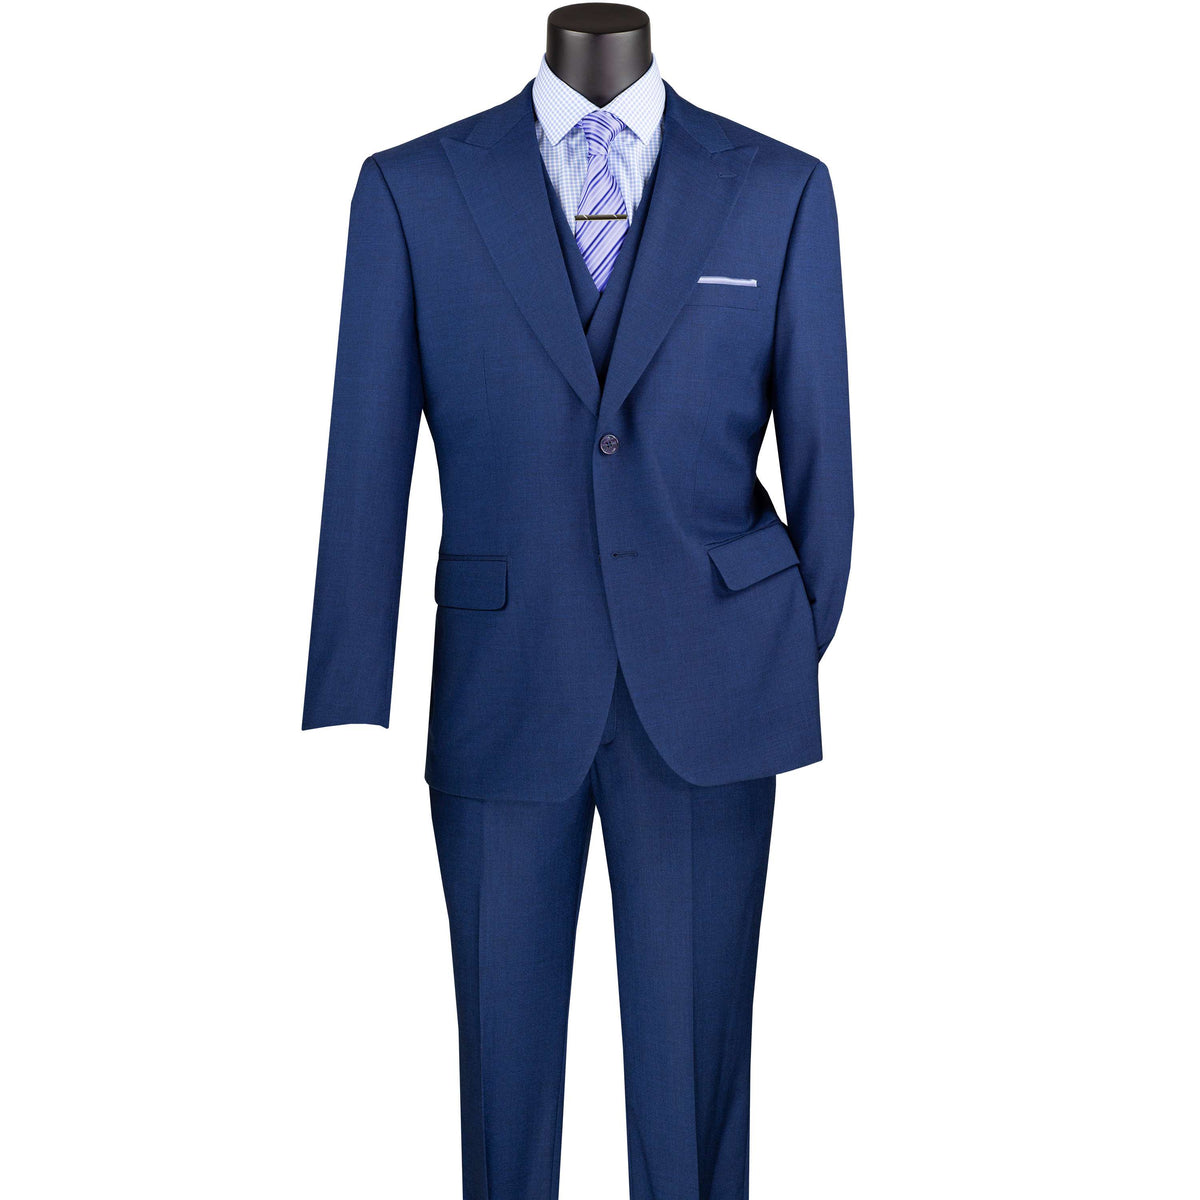 Textured 3-Piece Modern-Fit Suit w/ Adjustable Waistband in Navy Blue